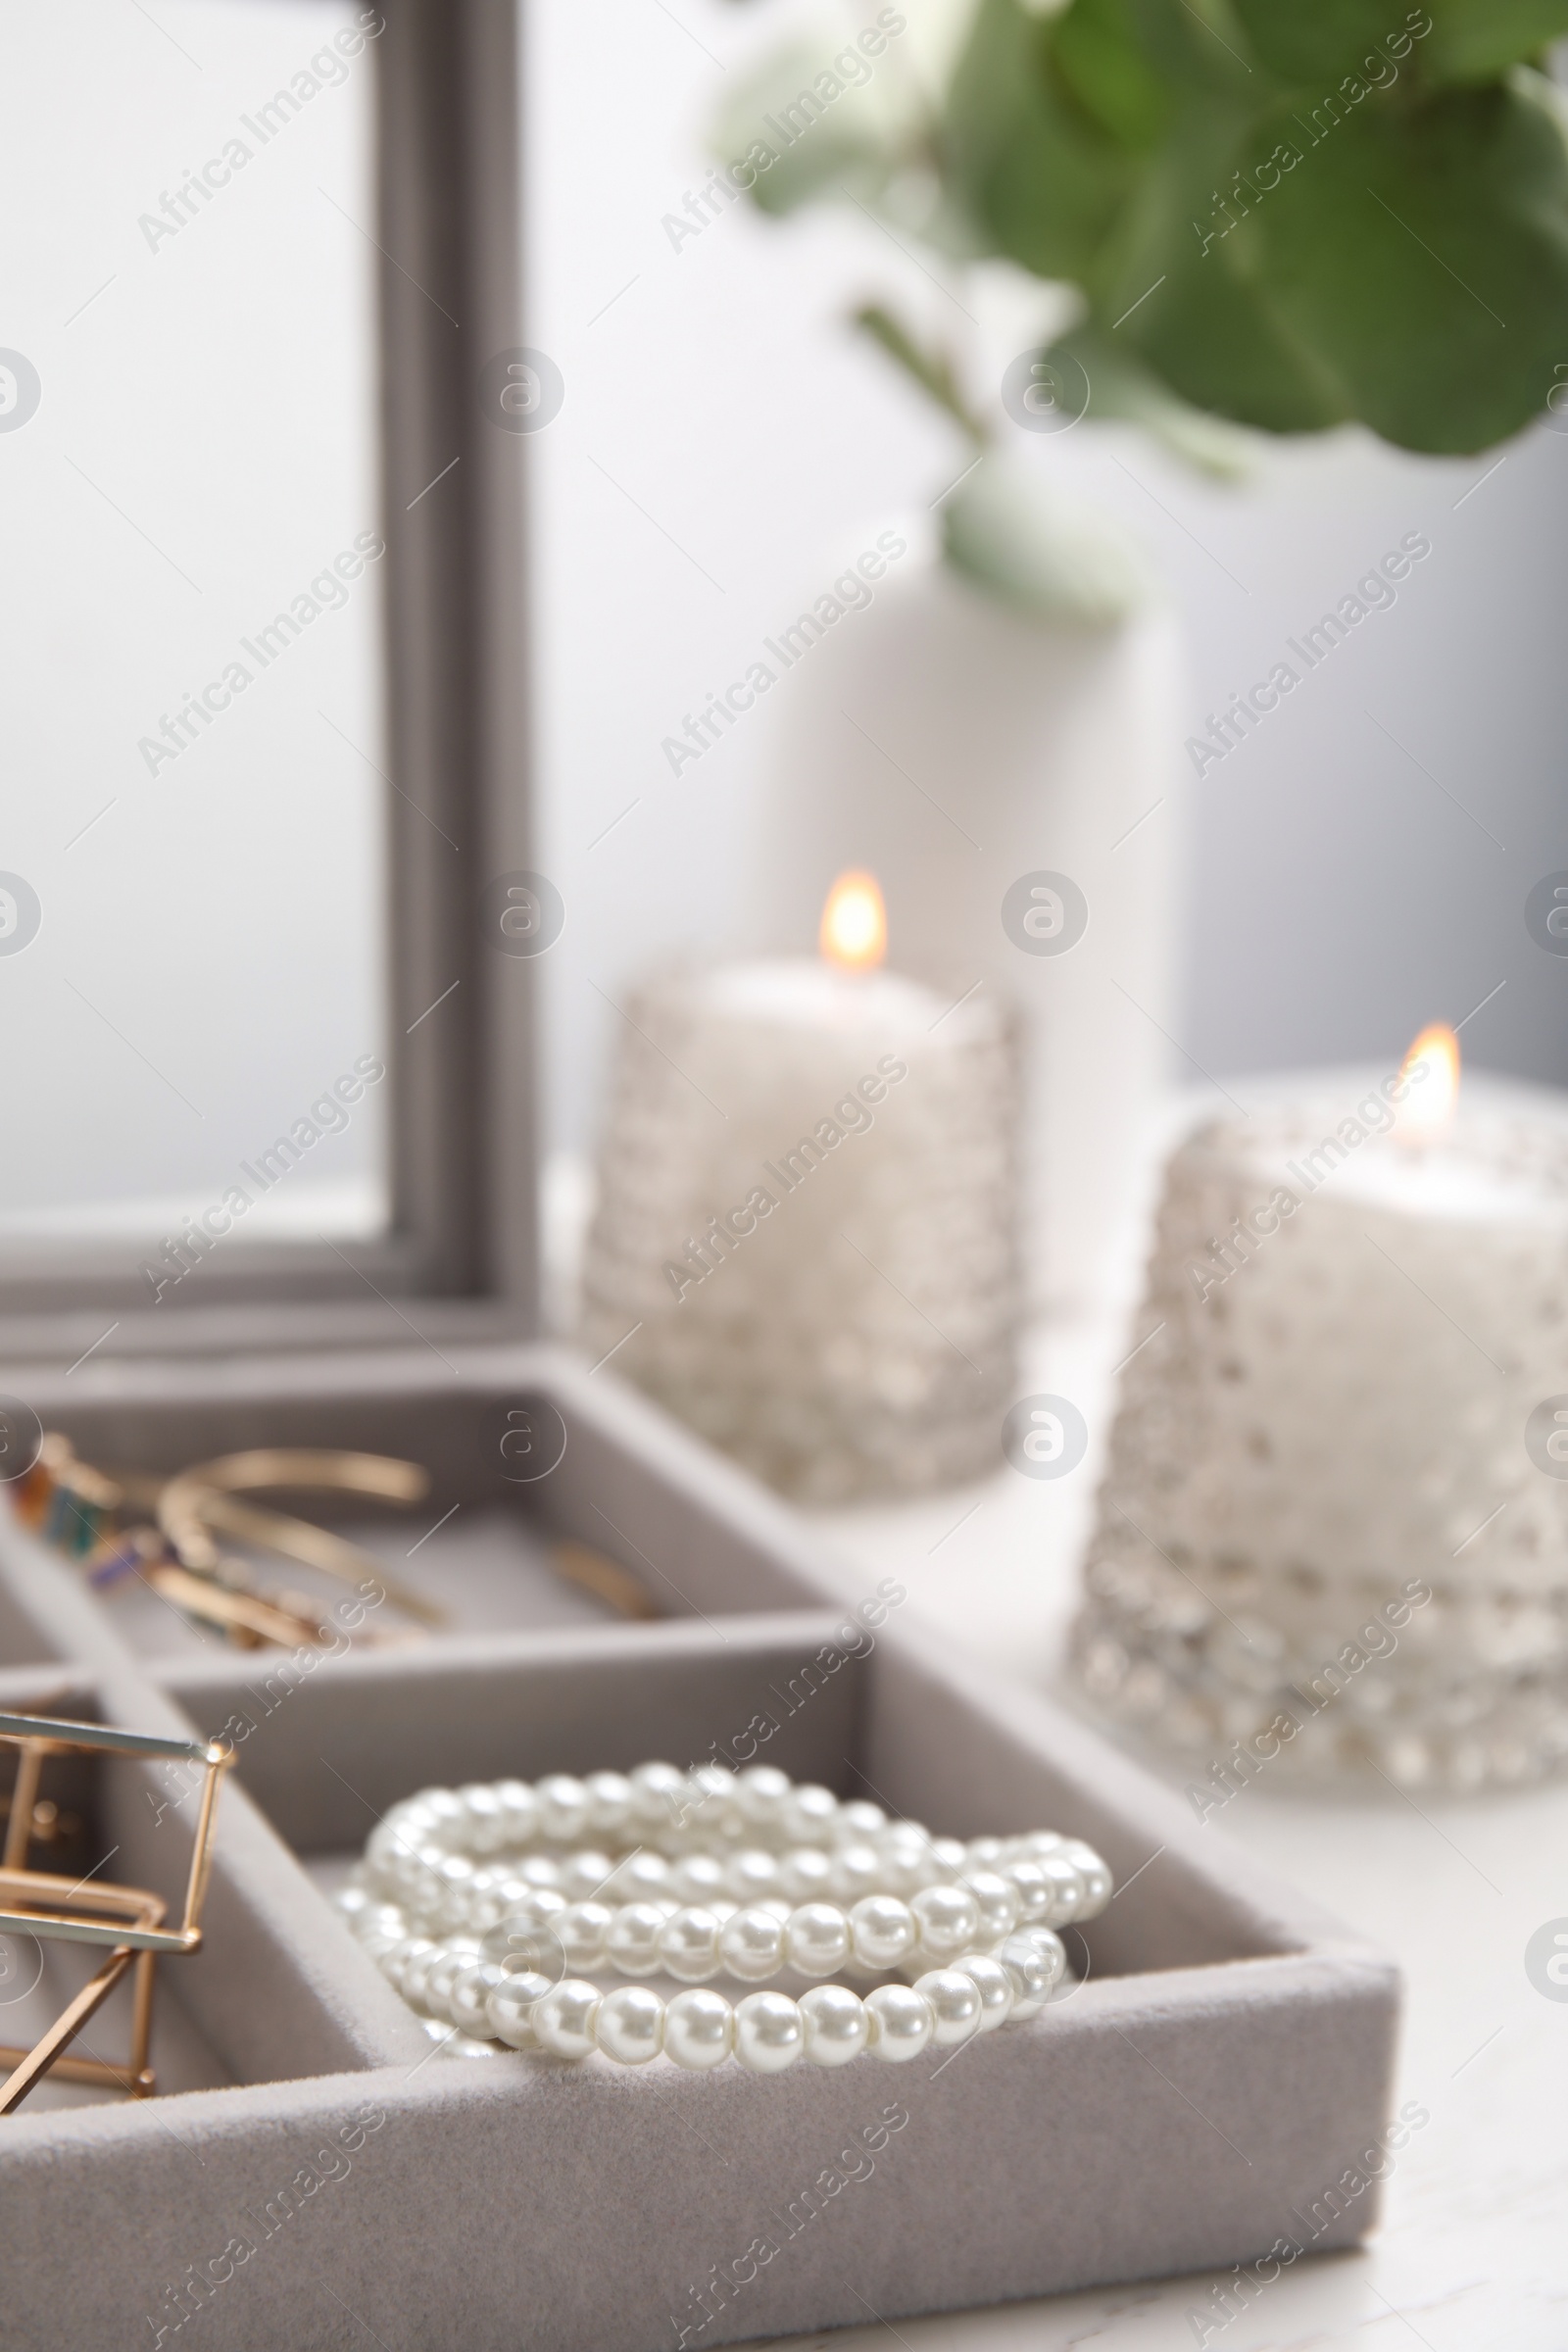 Photo of Elegant jewelry box with beautiful bijouterie on table, closeup